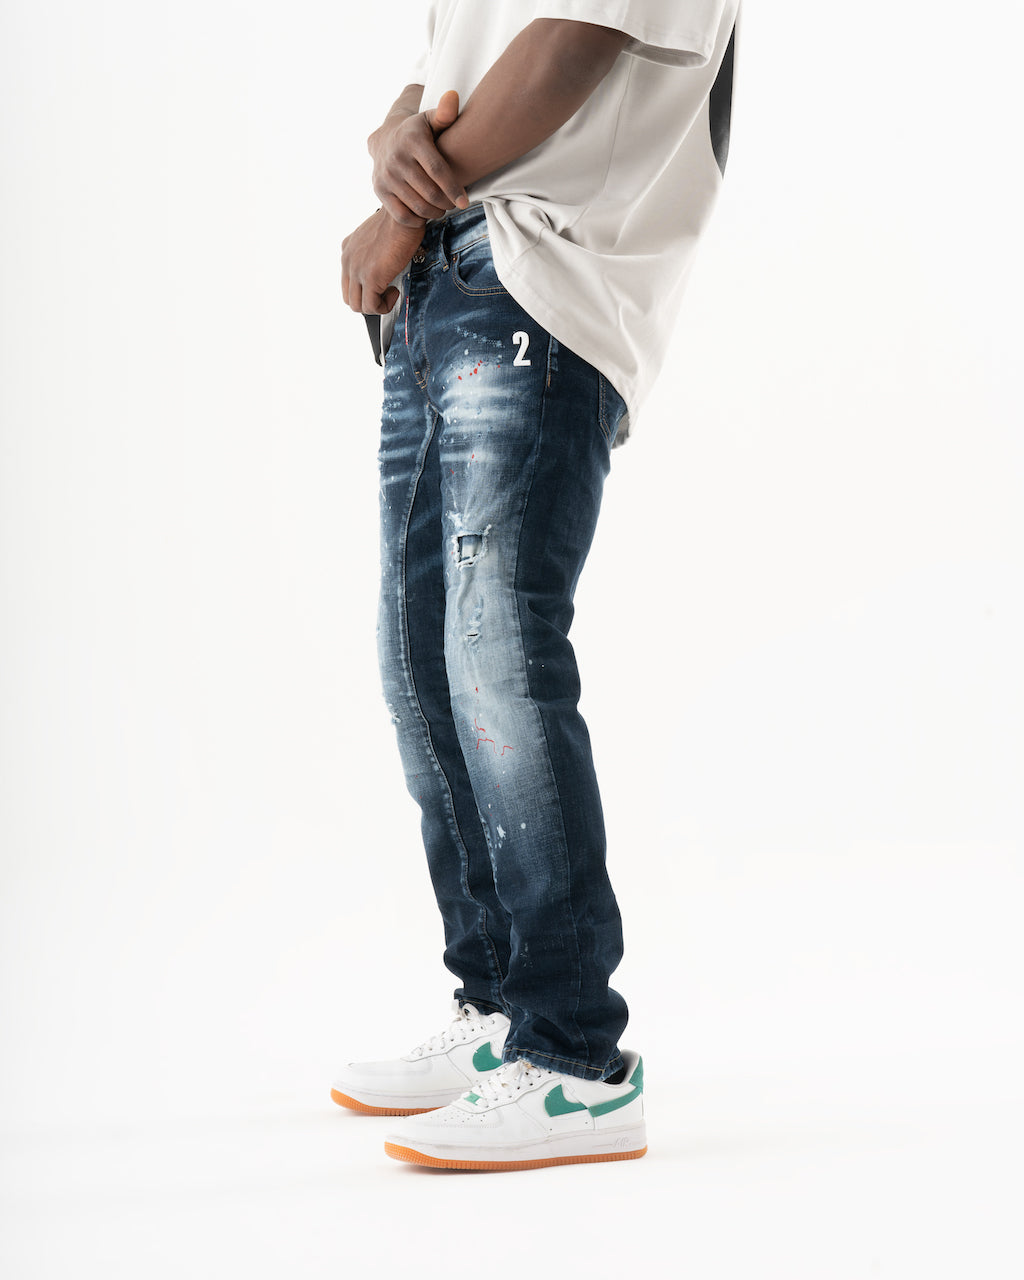 A man wearing a pair of STARLIGHT jeans and a white t - shirt.